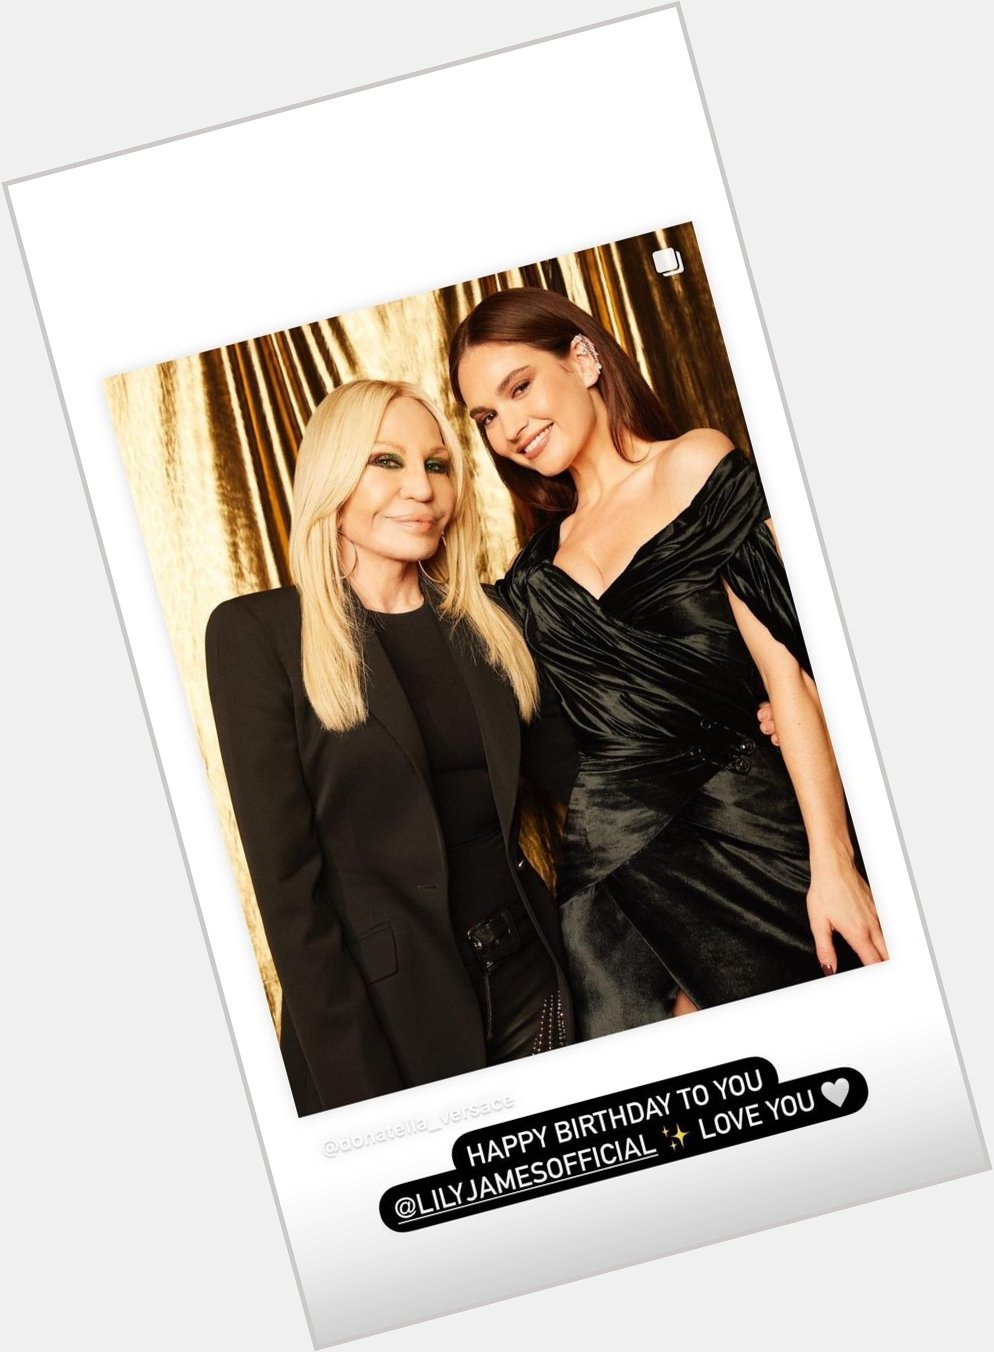 Donatella Versace and Charlotte Tilbury wishing Lily a Happy Birthday. Lily James on Instagram stories. 